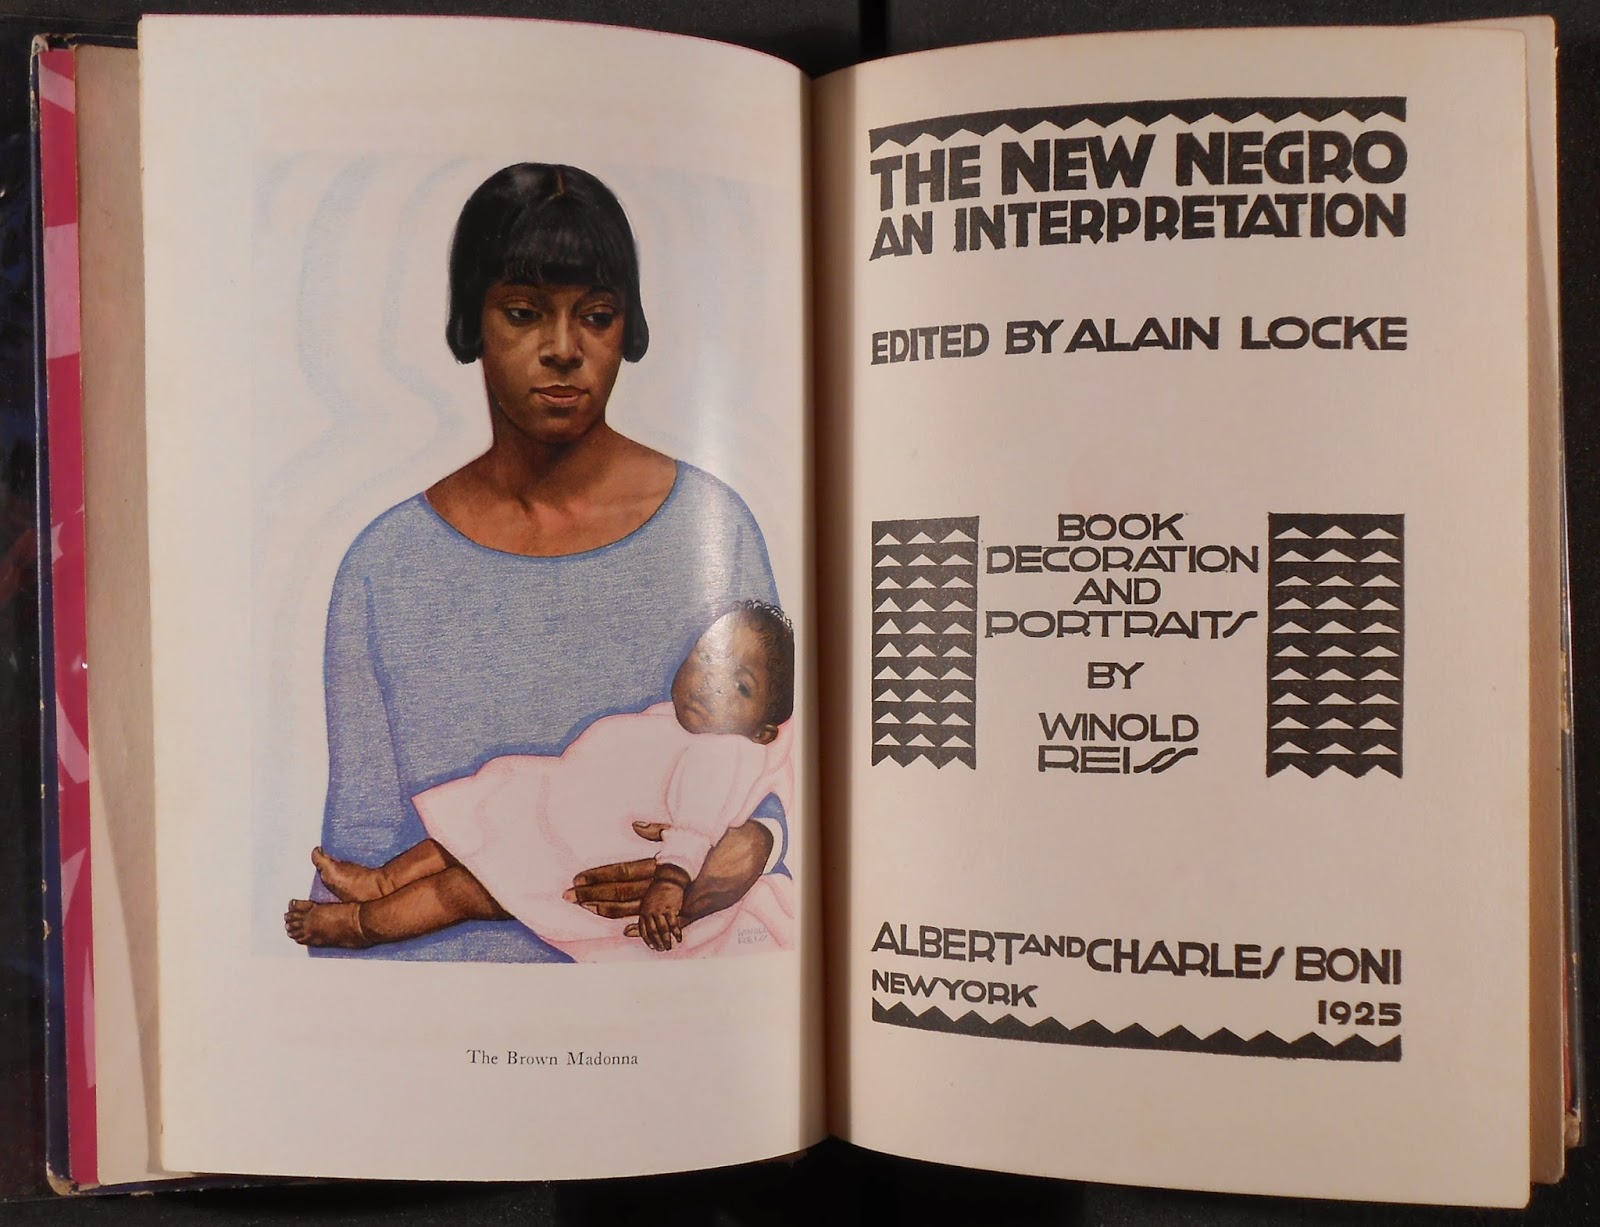 The title page for "The New Negro," including an illustration on the opposite page showing a woman holding a child.